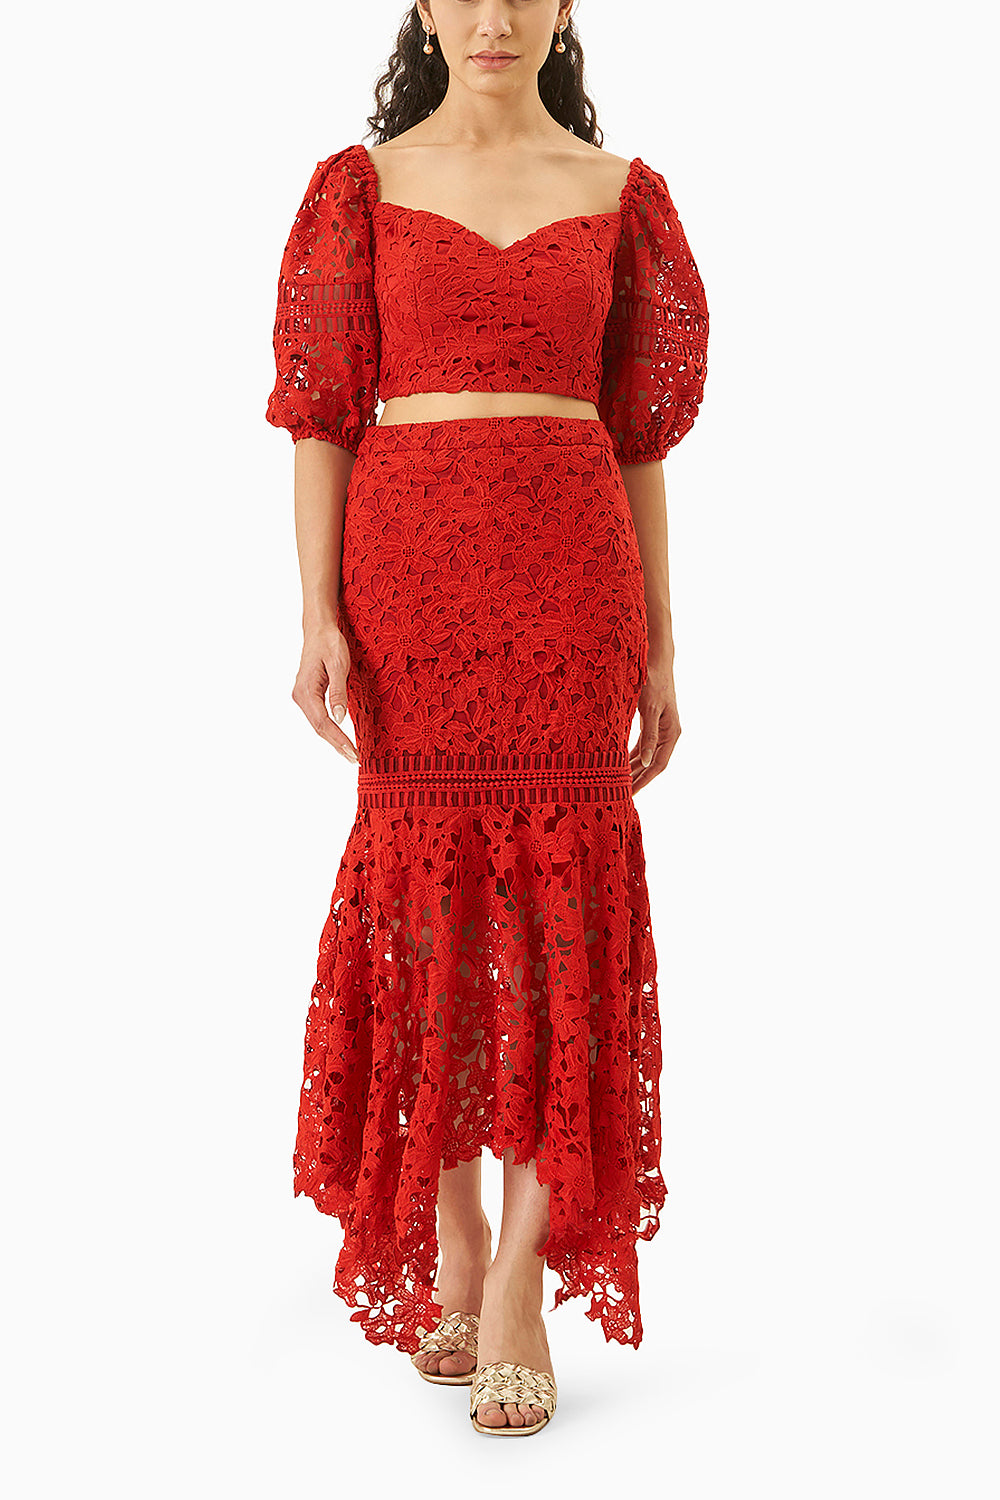 Lyra Red Lace Coord set